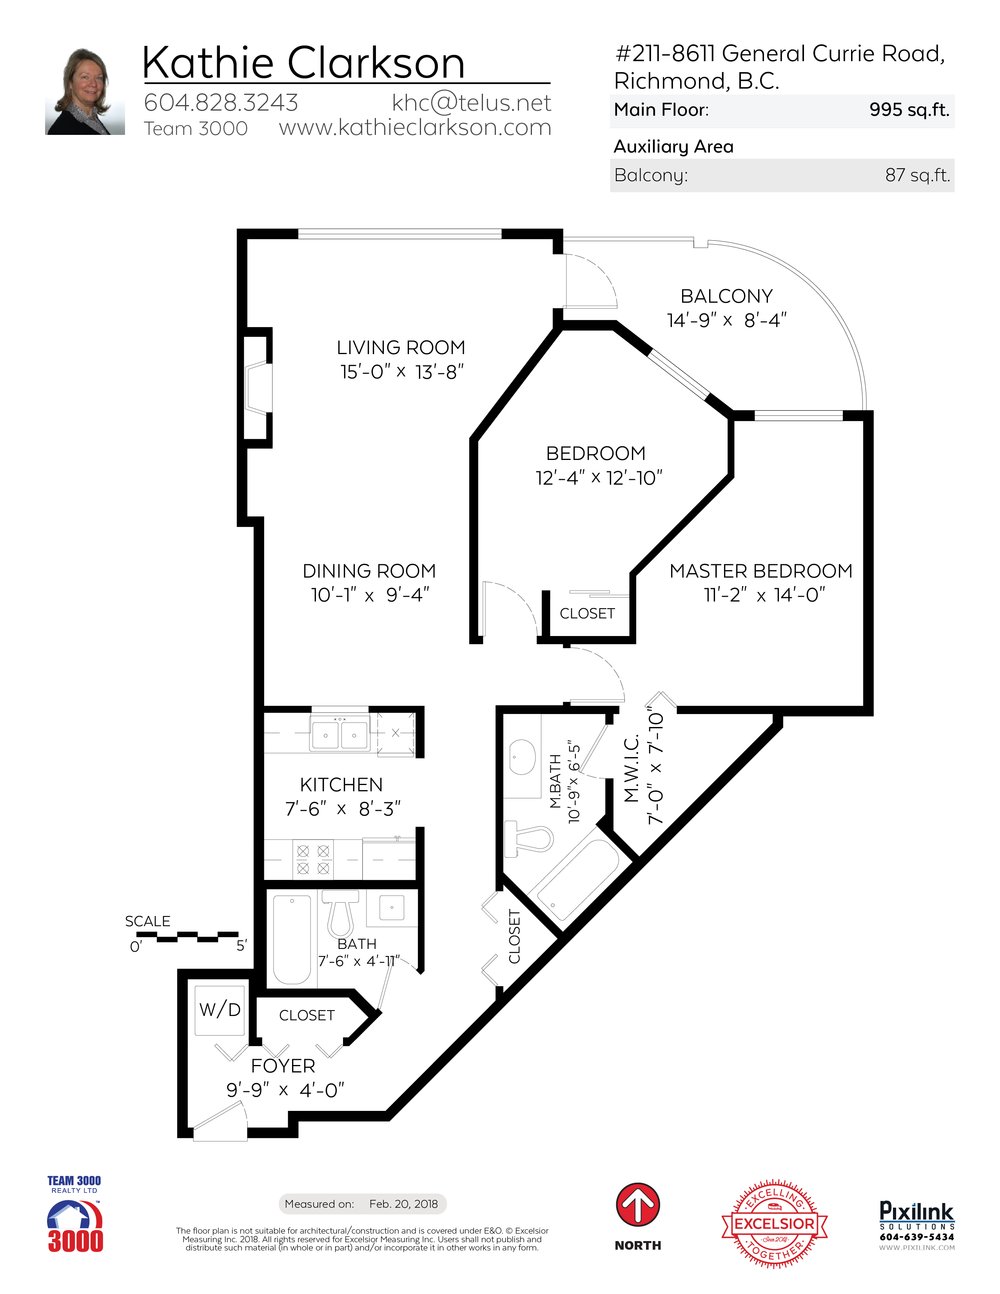 Floor Plan for a 2 Bedroom Apartment in 